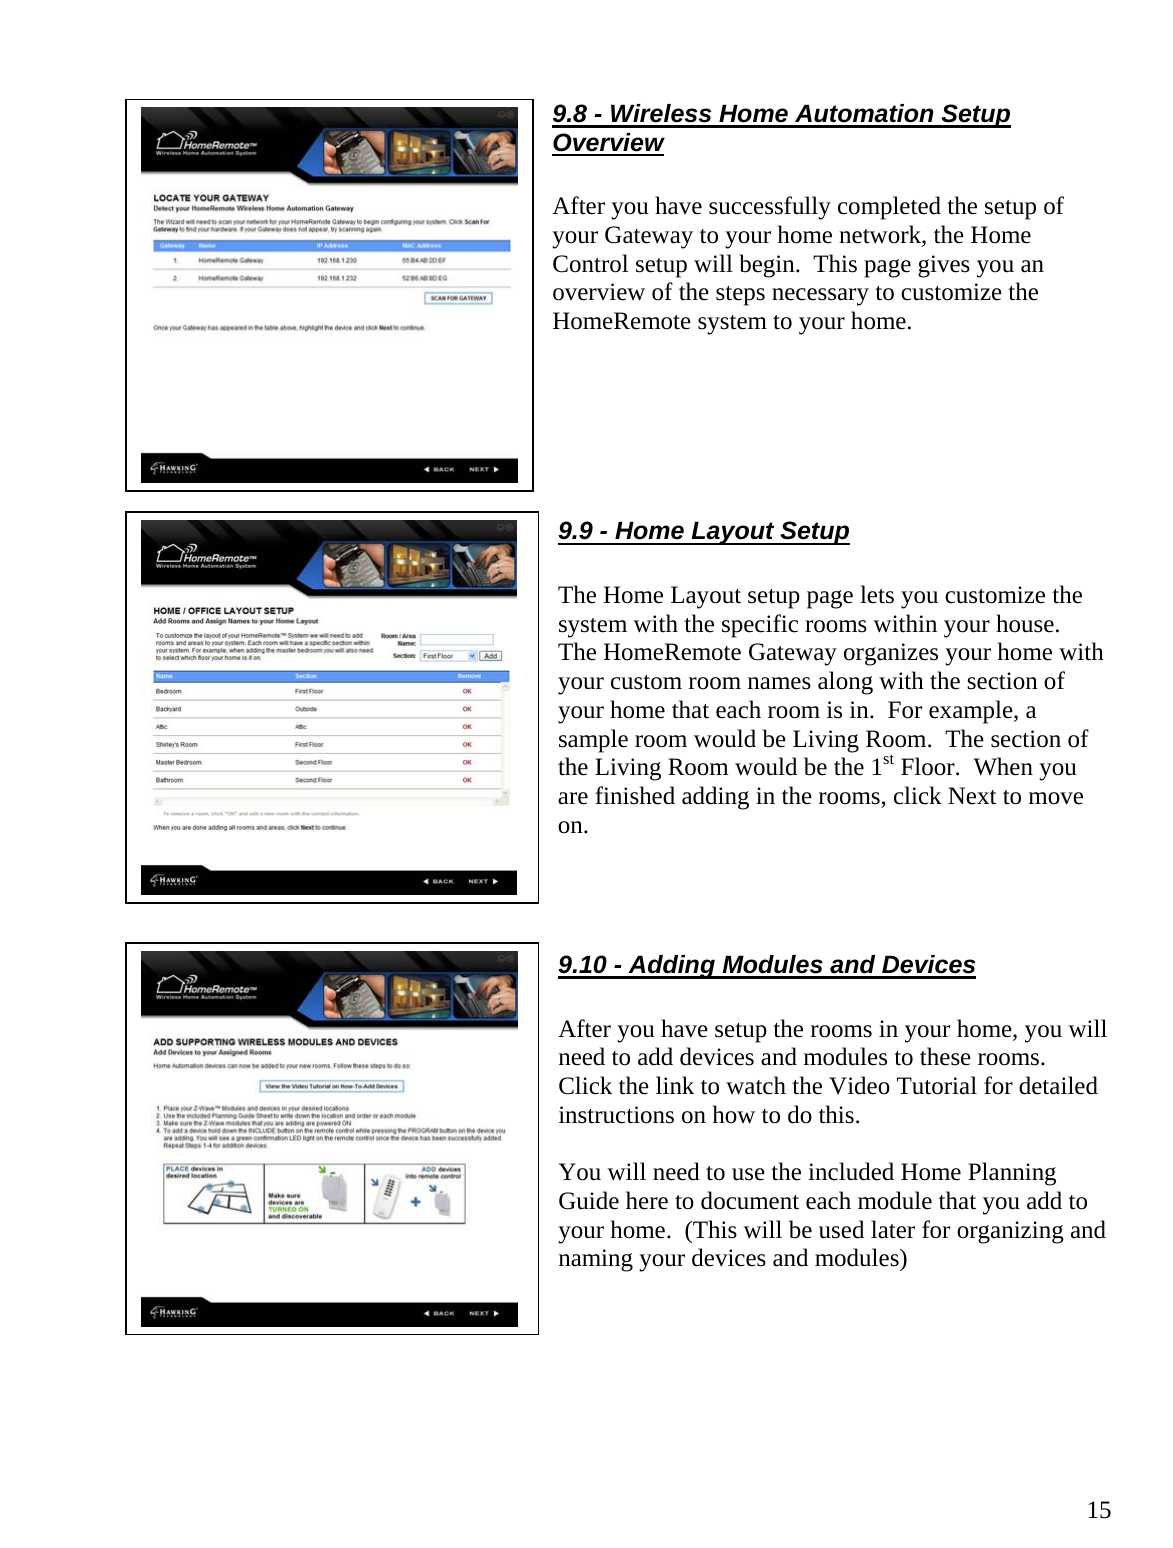  159.8 - Wireless Home Automation Setup Overview  After you have successfully completed the setup of your Gateway to your home network, the Home Control setup will begin.  This page gives you an overview of the steps necessary to customize the HomeRemote system to your home.      9.9 - Home Layout Setup  The Home Layout setup page lets you customize the system with the specific rooms within your house.  The HomeRemote Gateway organizes your home with your custom room names along with the section of your home that each room is in.  For example, a sample room would be Living Room.  The section of the Living Room would be the 1st Floor.  When you are finished adding in the rooms, click Next to move on.    9.10 - Adding Modules and Devices  After you have setup the rooms in your home, you will need to add devices and modules to these rooms.  Click the link to watch the Video Tutorial for detailed instructions on how to do this.   You will need to use the included Home Planning Guide here to document each module that you add to your home.  (This will be used later for organizing and naming your devices and modules)       